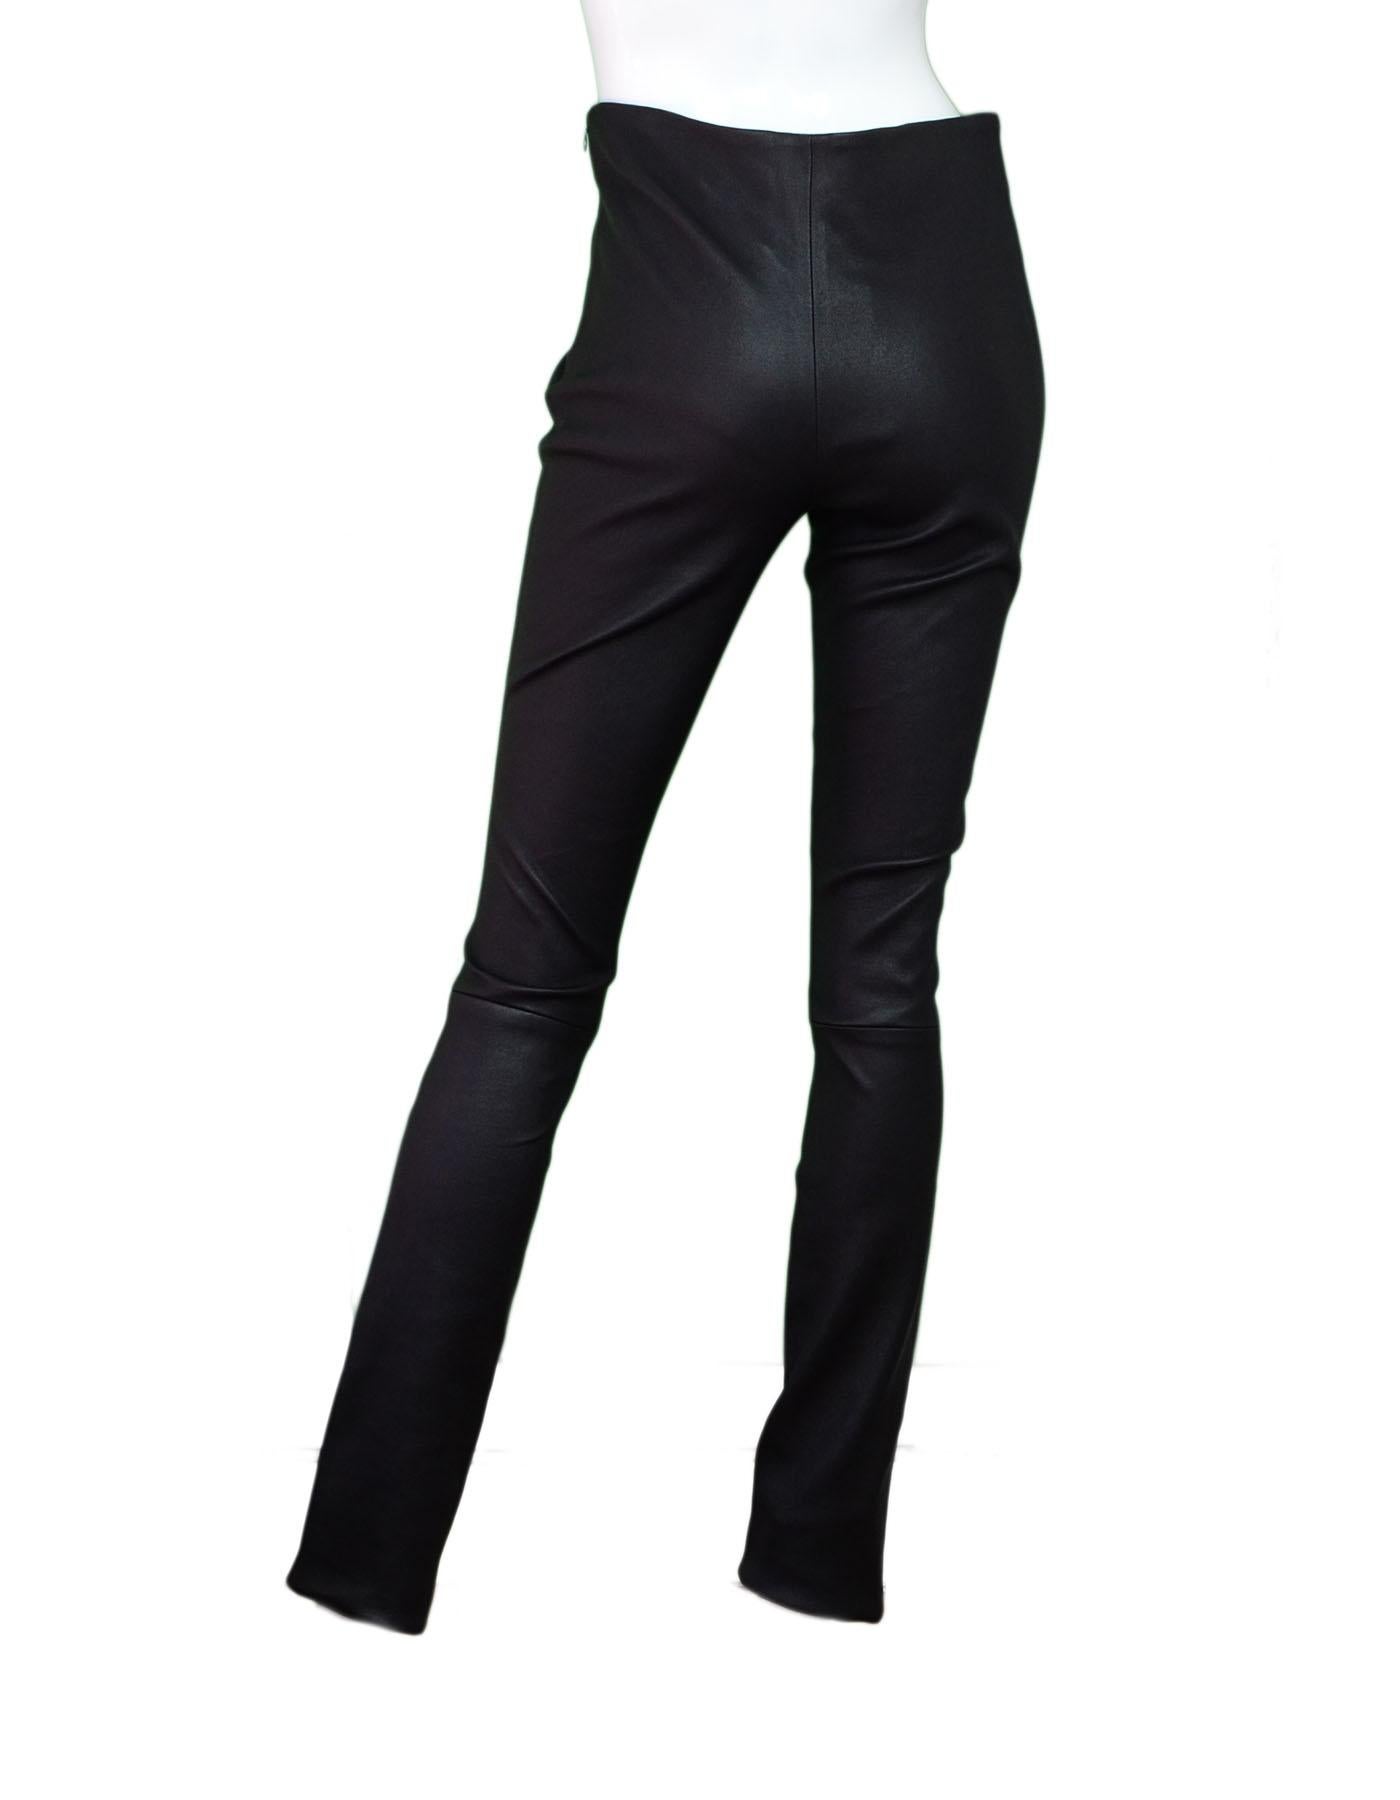 Cushnie Et Ochs Black Leather Leggings Sz 10 NWT In Excellent Condition In New York, NY